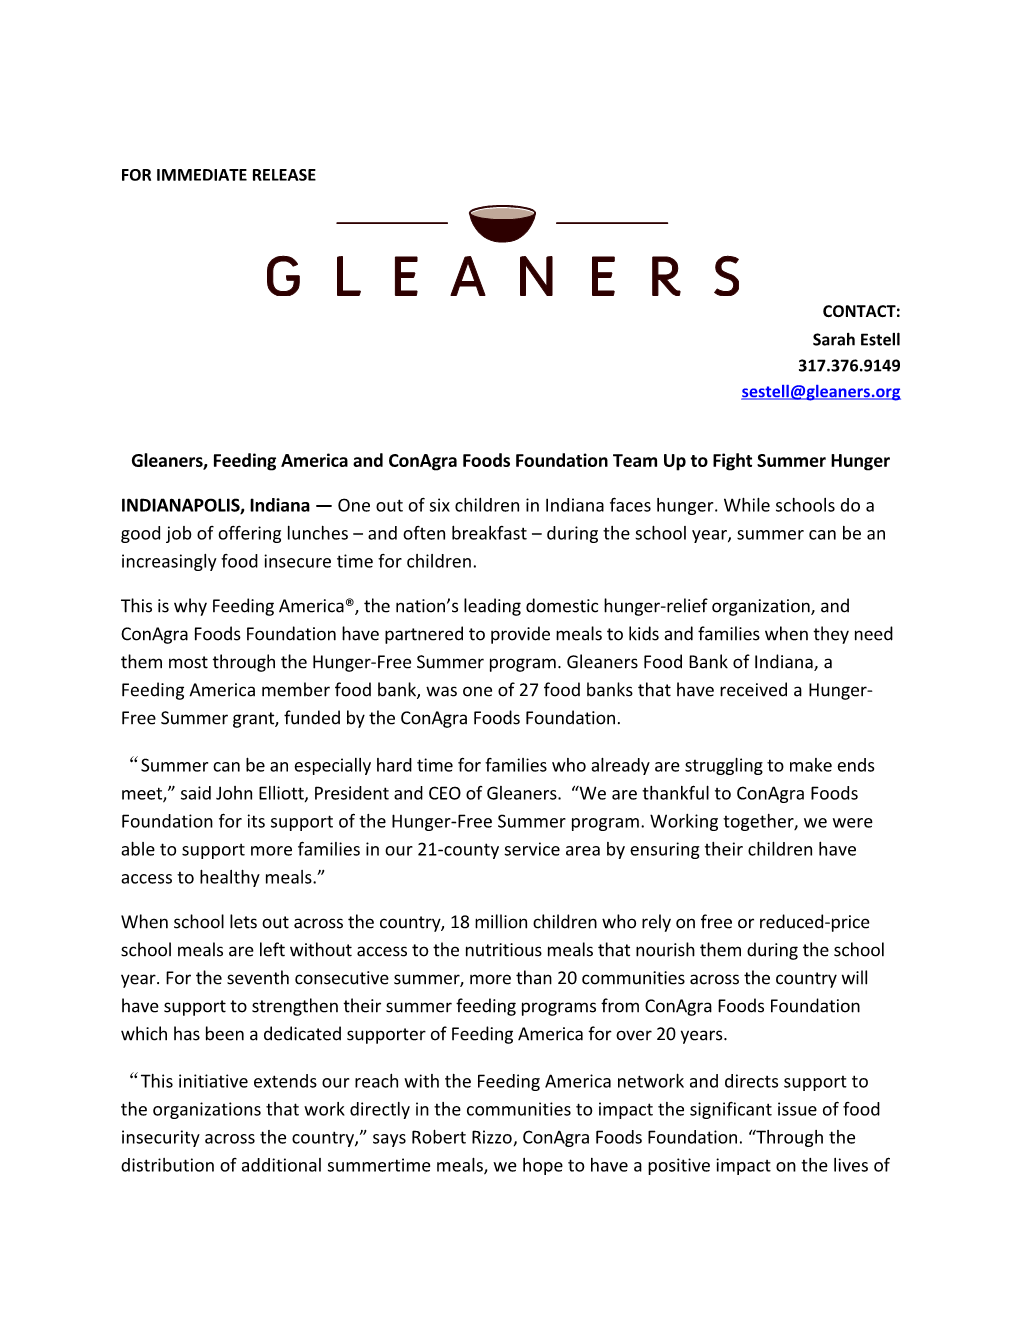 Gleaners, Feeding America and Conagra Foods Foundation Team up to Fight Summer Hunger